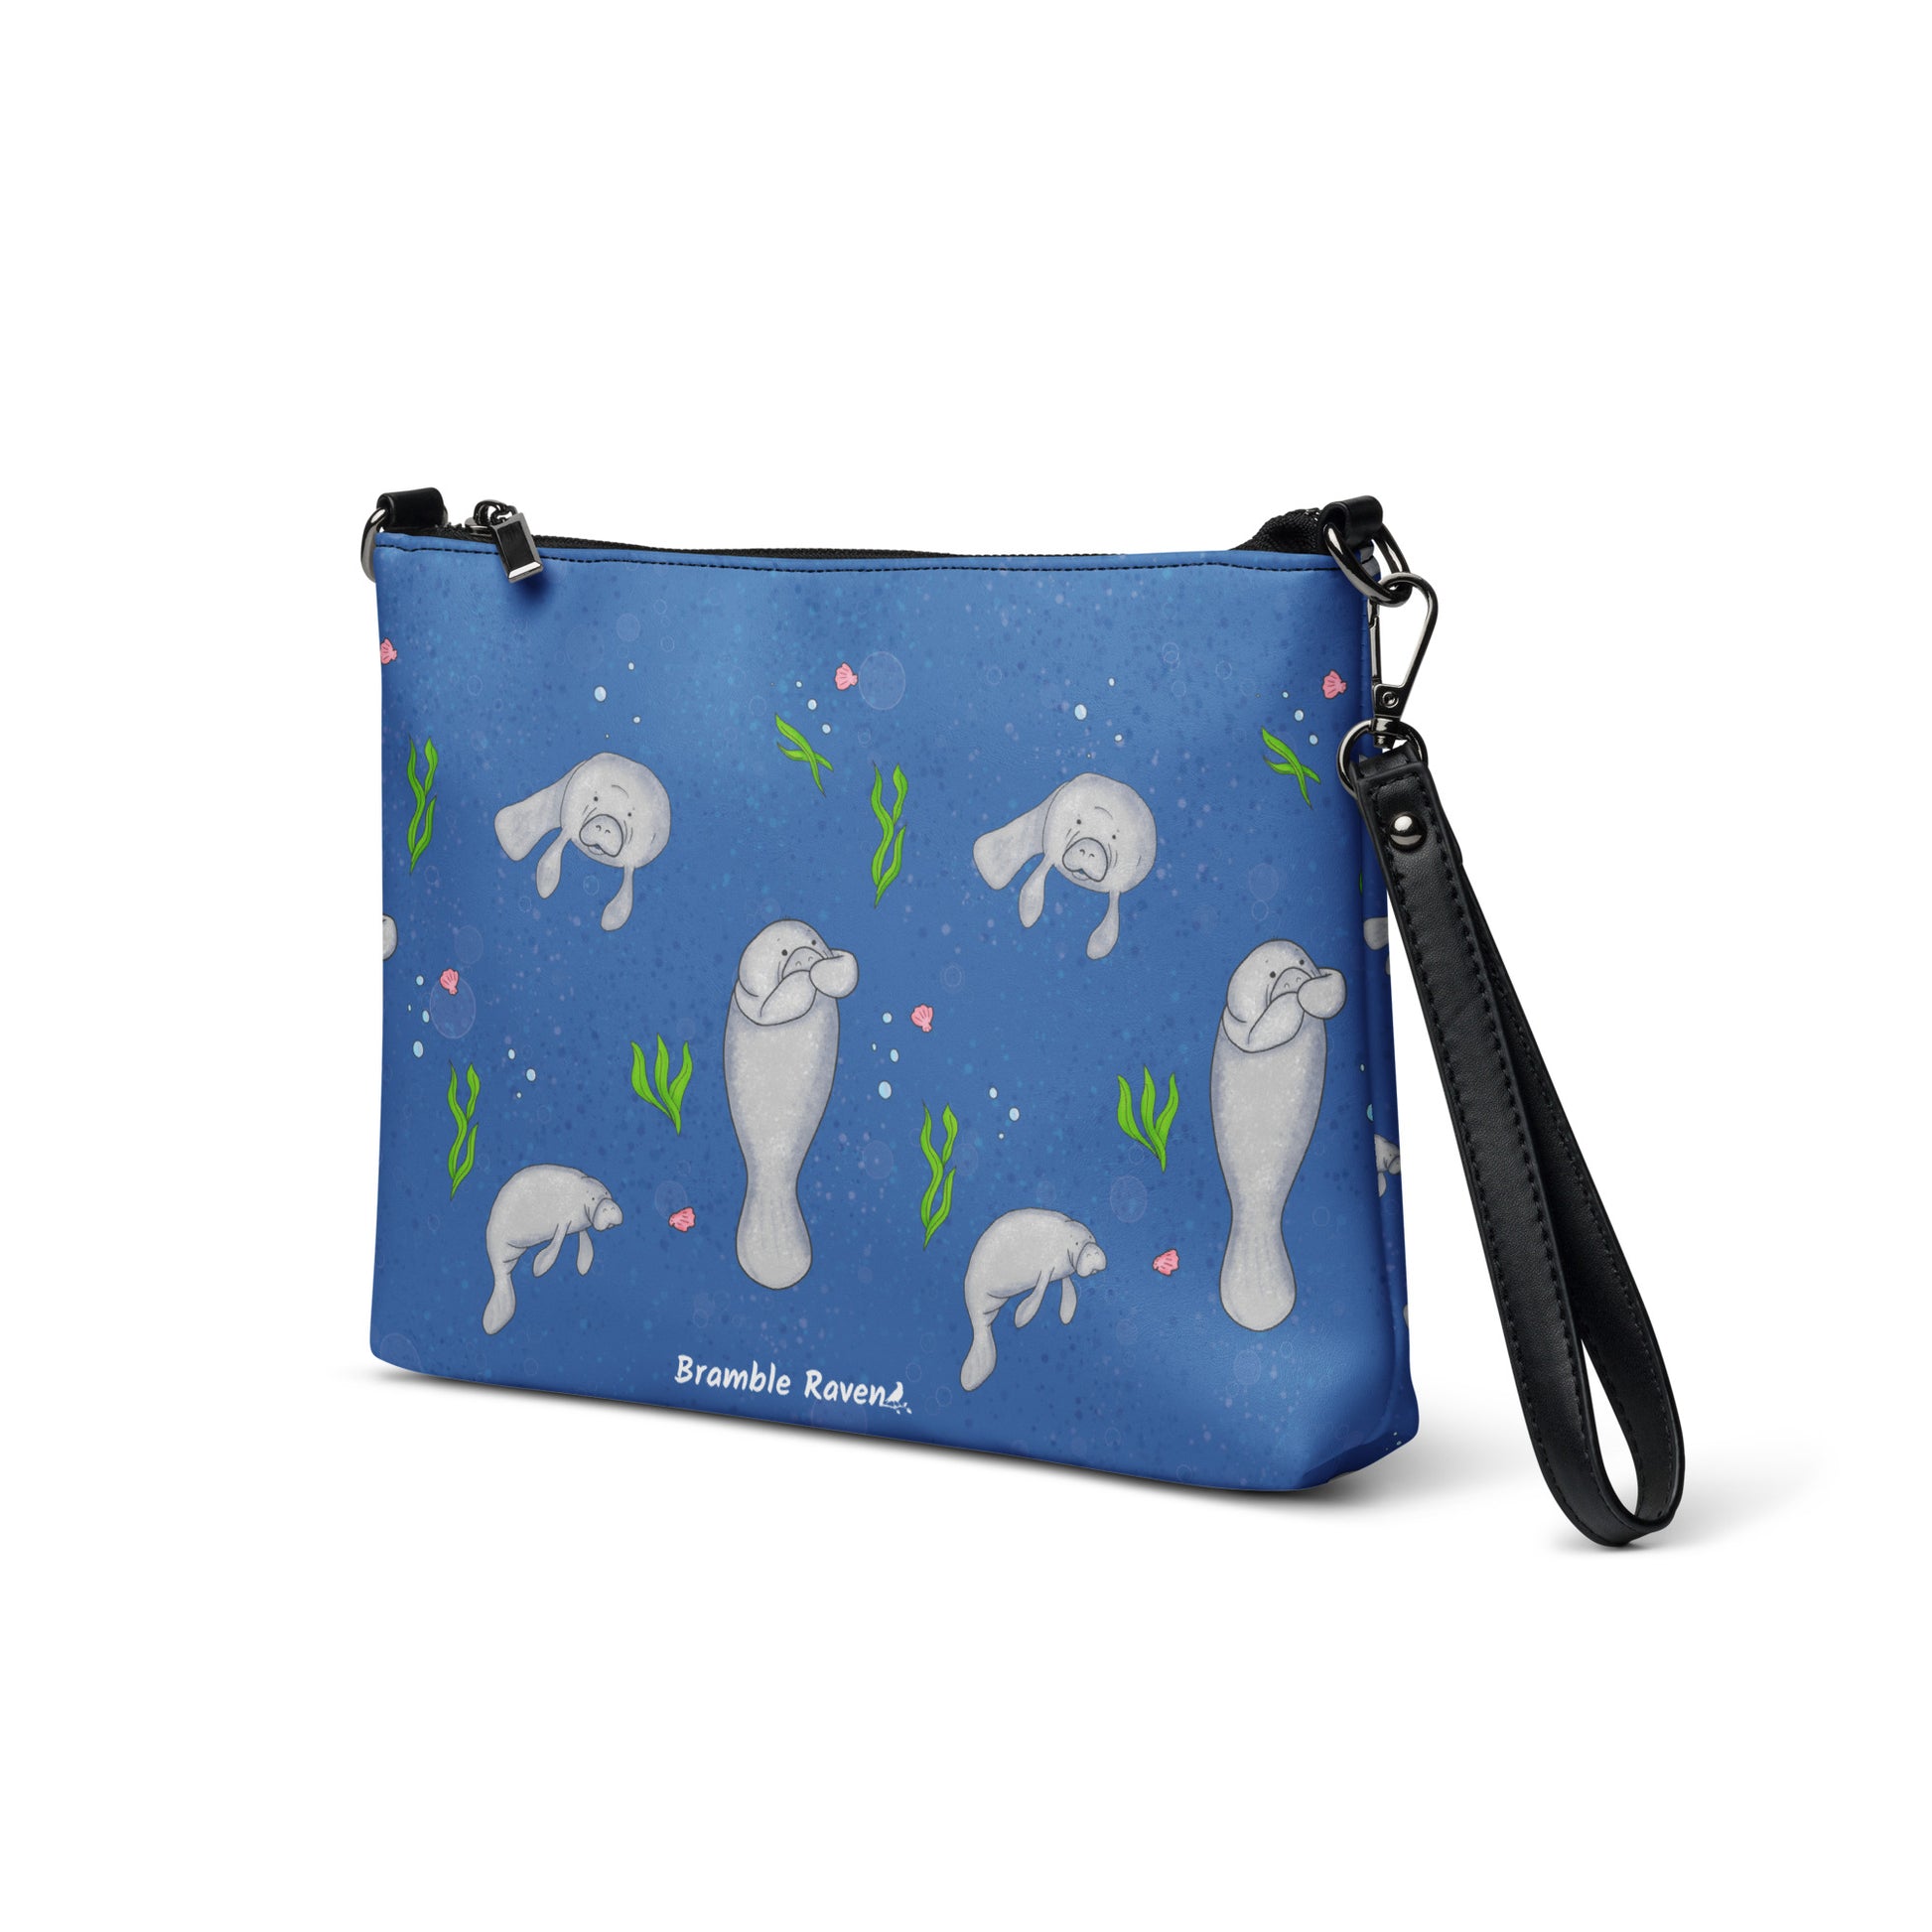 Manatee crossbody bag. Faux leather with polyester lining and dark grey hardware. Comes with adjustable removable wrist and shoulder straps. Front view of bag at an angle with manatees on a dark blue background.